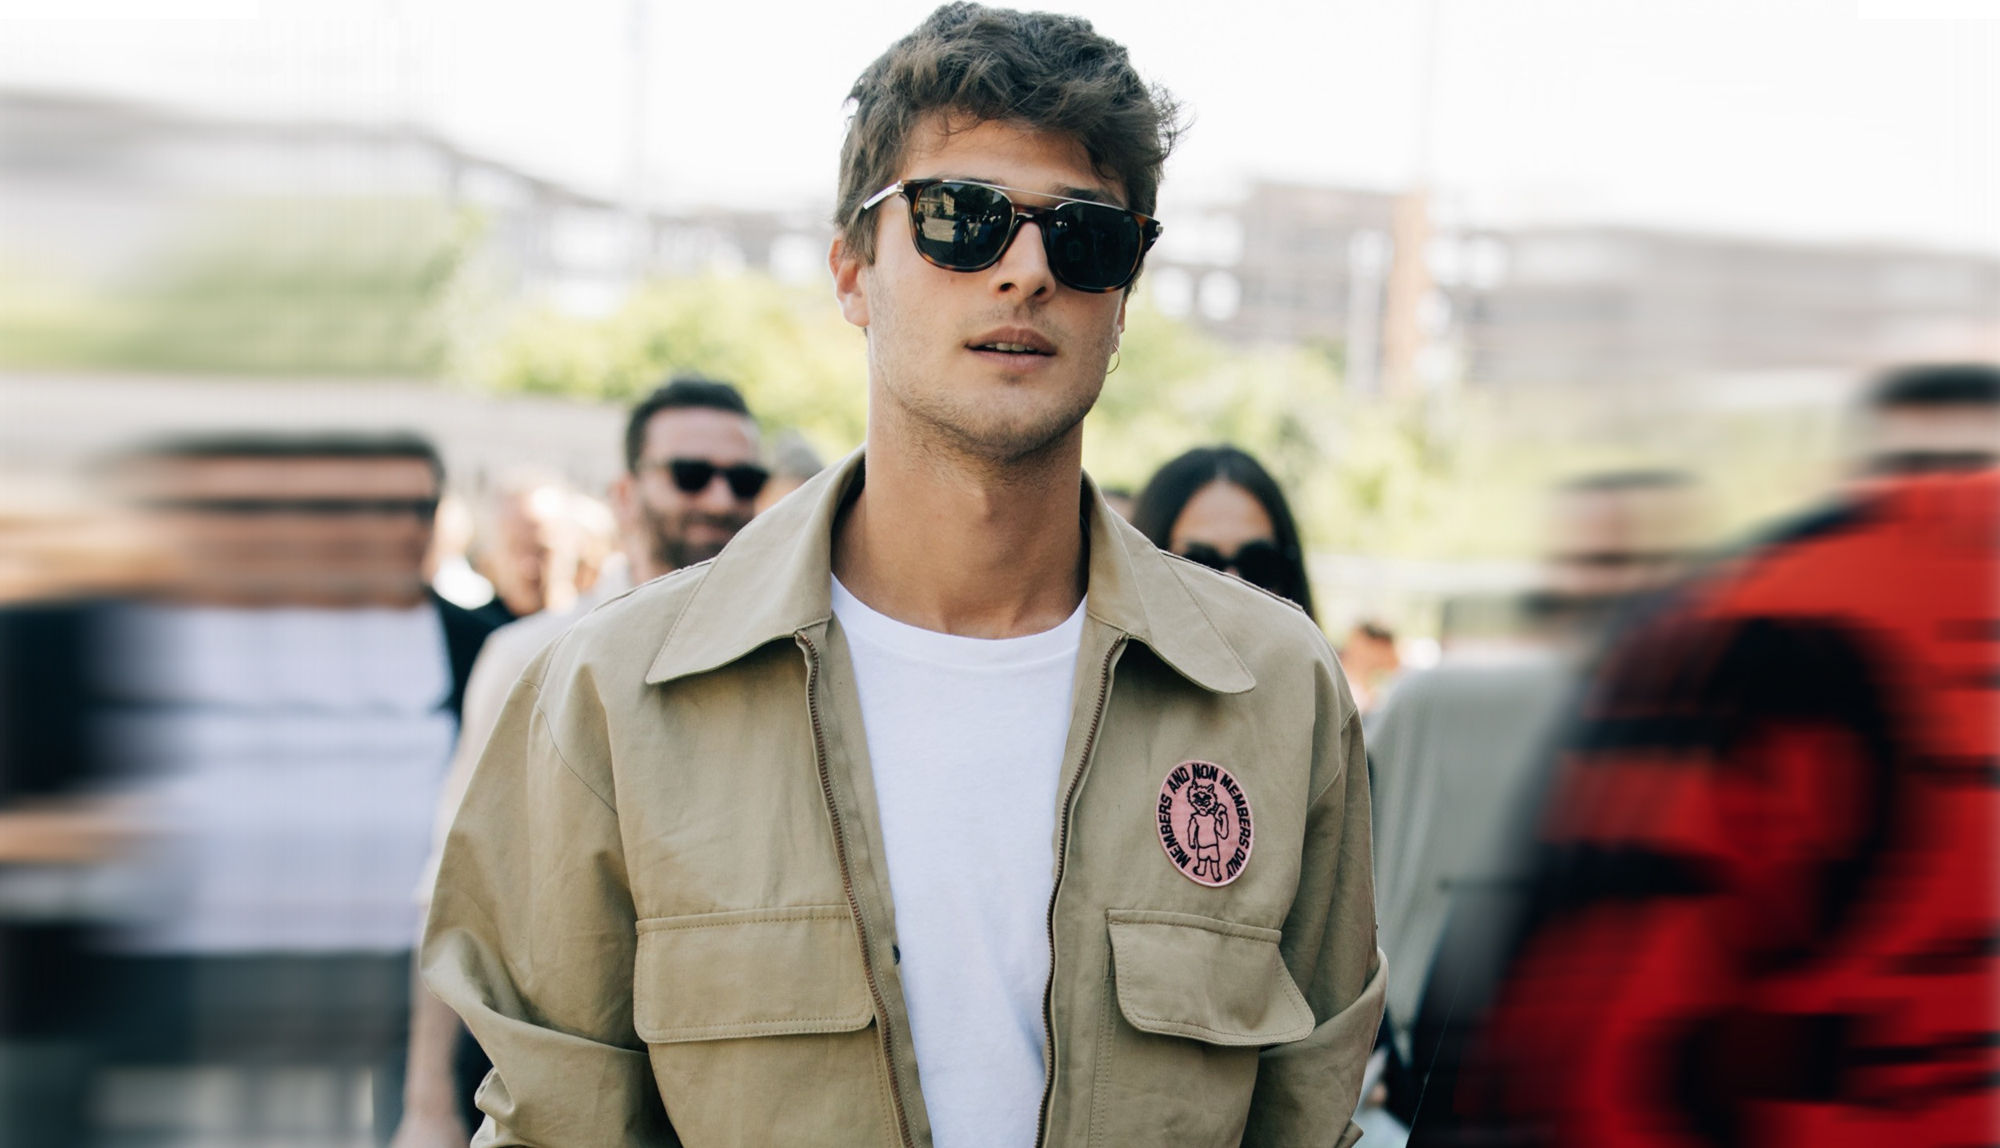 Here’s how you can work the SS18 menswear trends into your daily attire